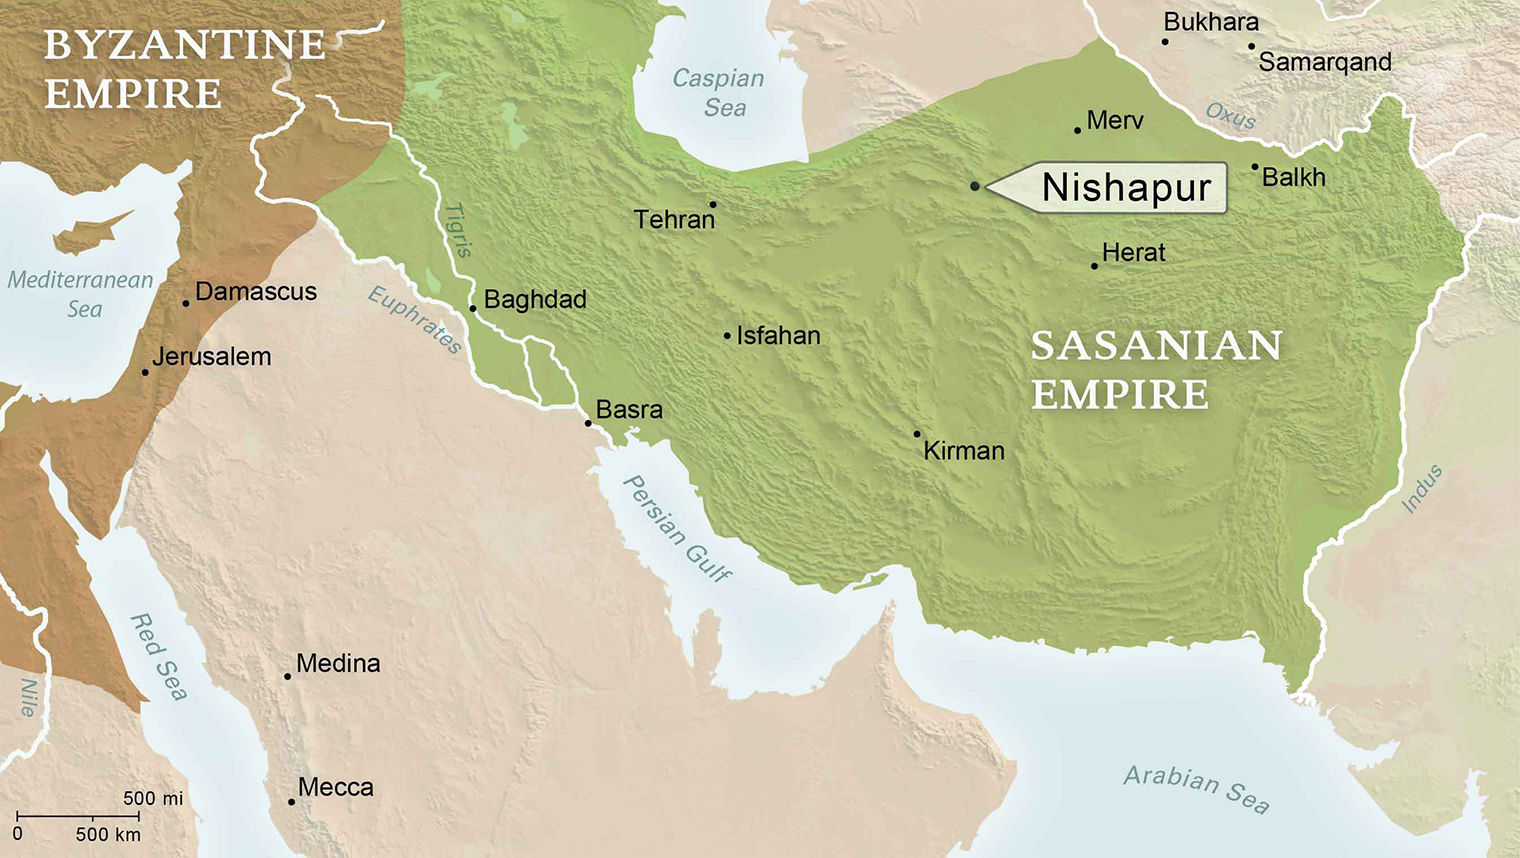 Close up map of Iran showing area of the Sasanian Empire highlighted in green and area of the Byzantine Empire highlighted in brown with a dot on the Northeast showing the location of Nishapur